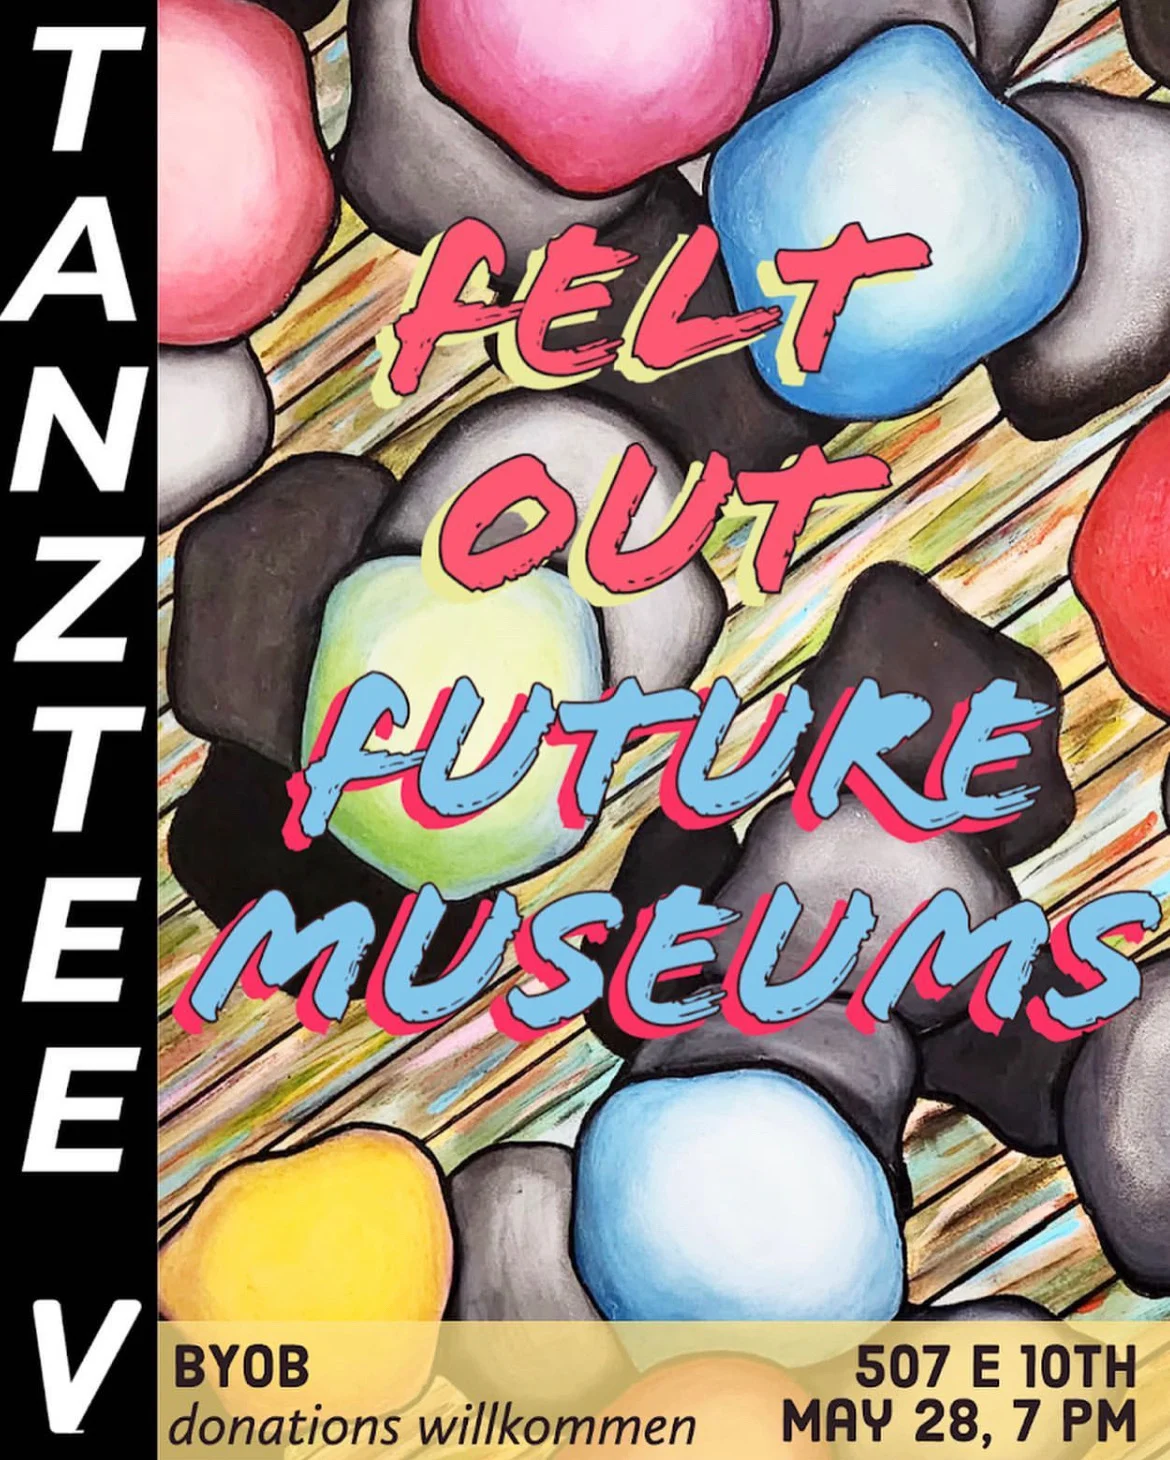 Future Museums and Felt Out at German Free School Poster.